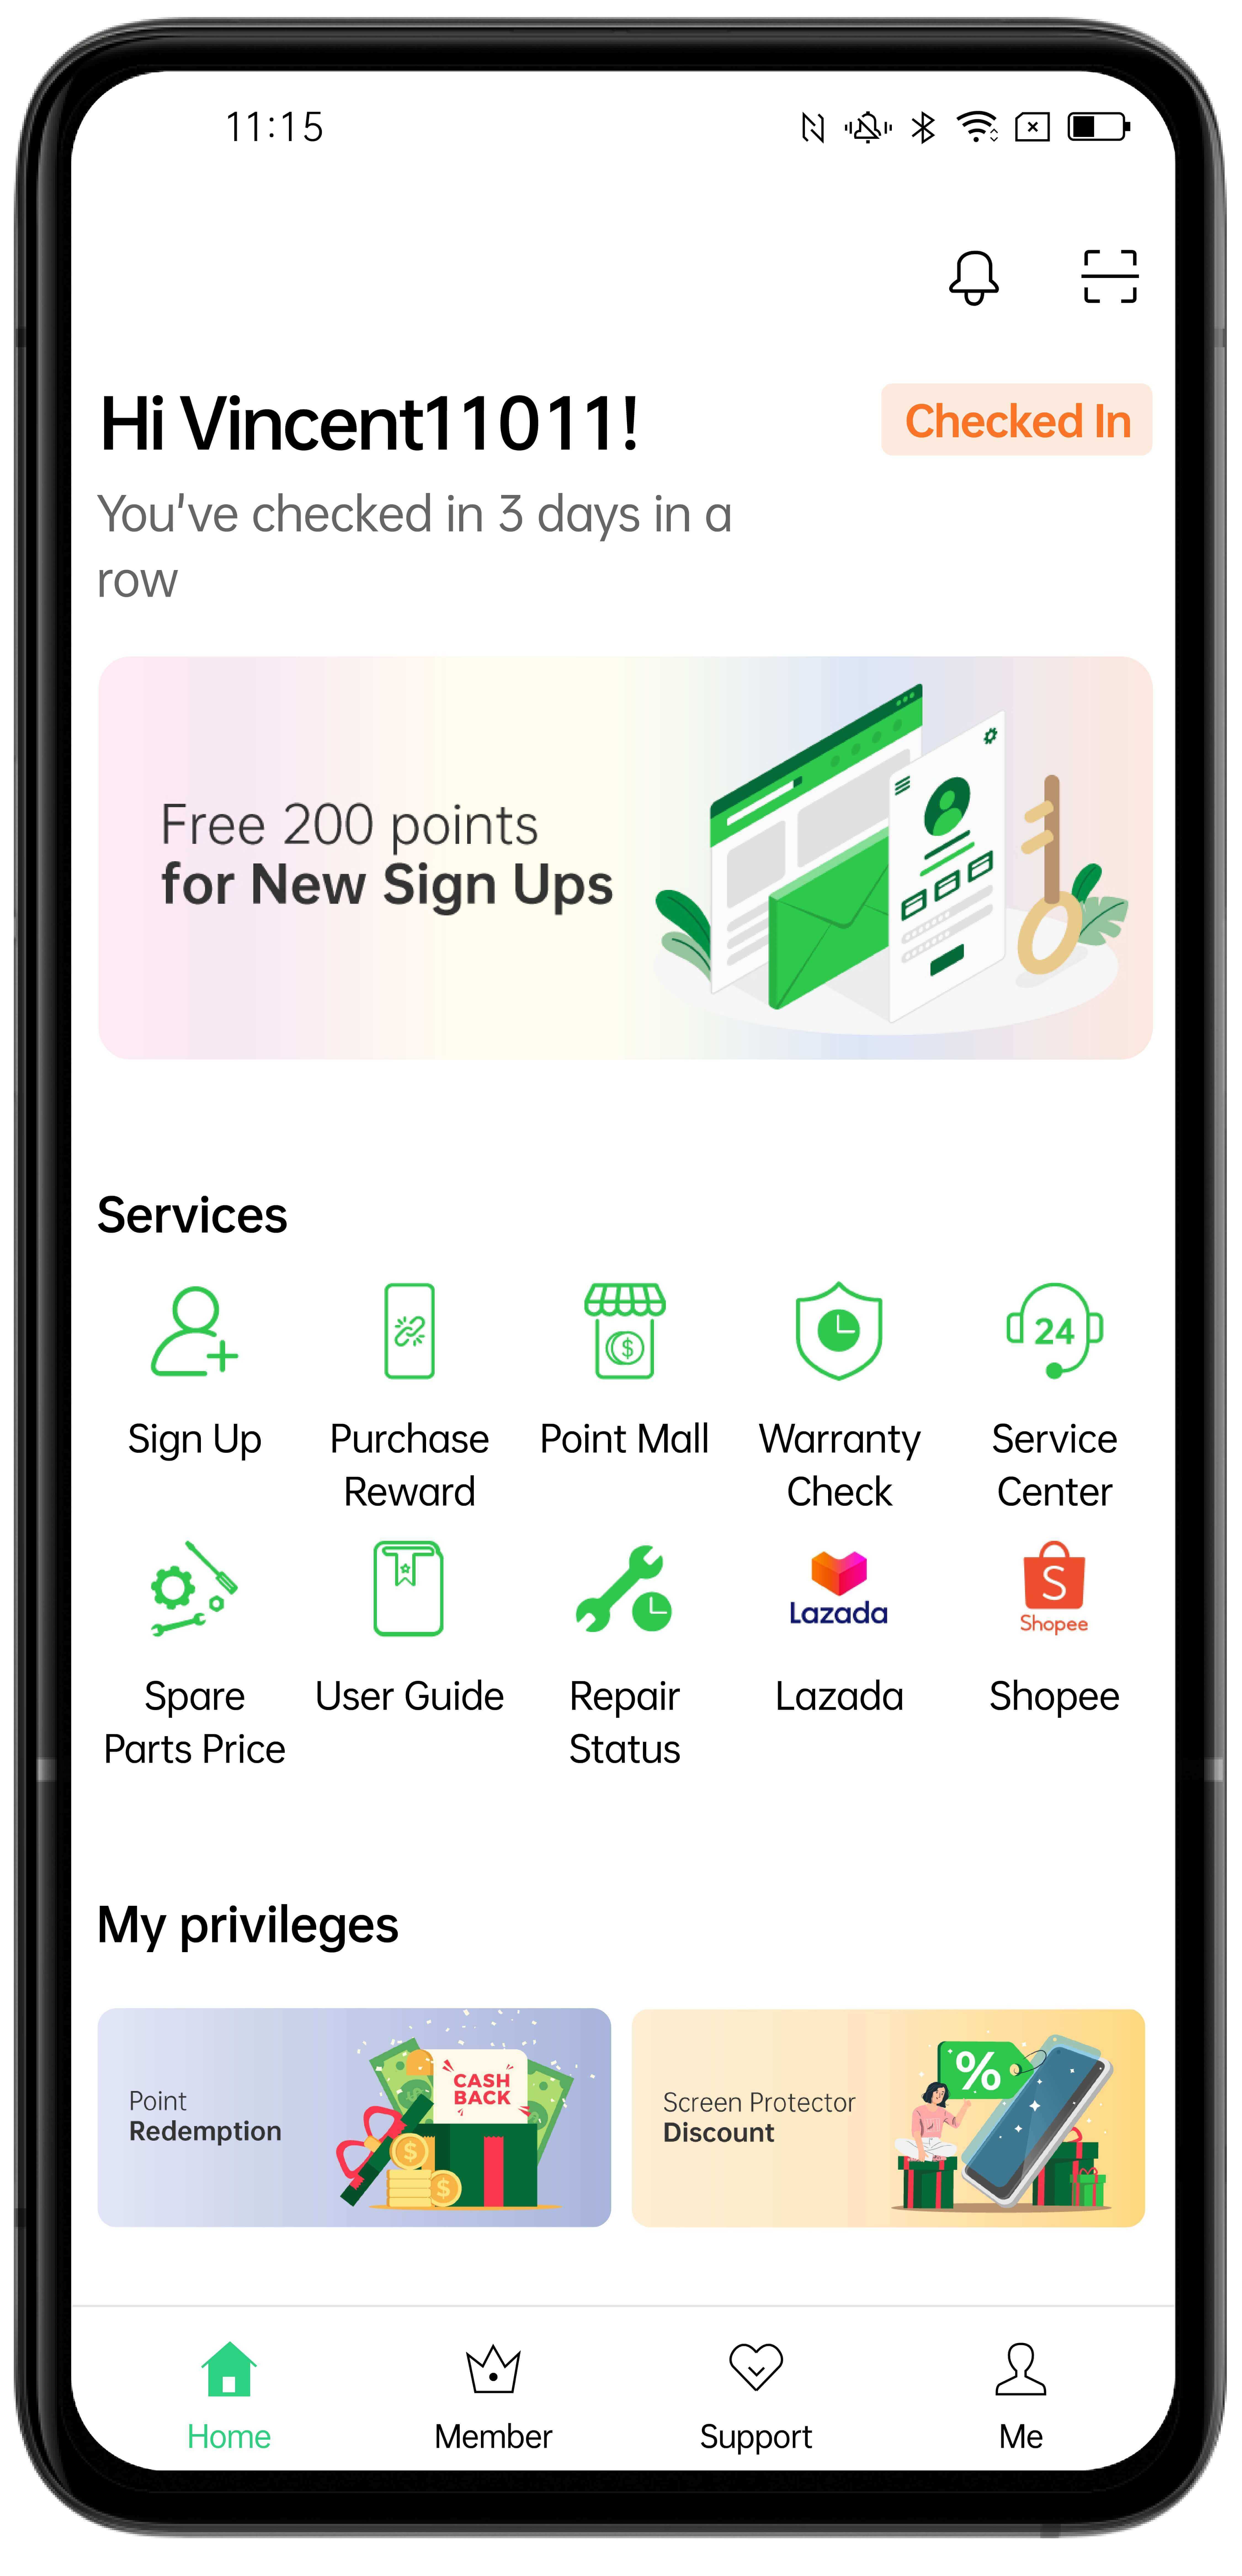 Register My OPPO App to earn points and enjoy member privileges